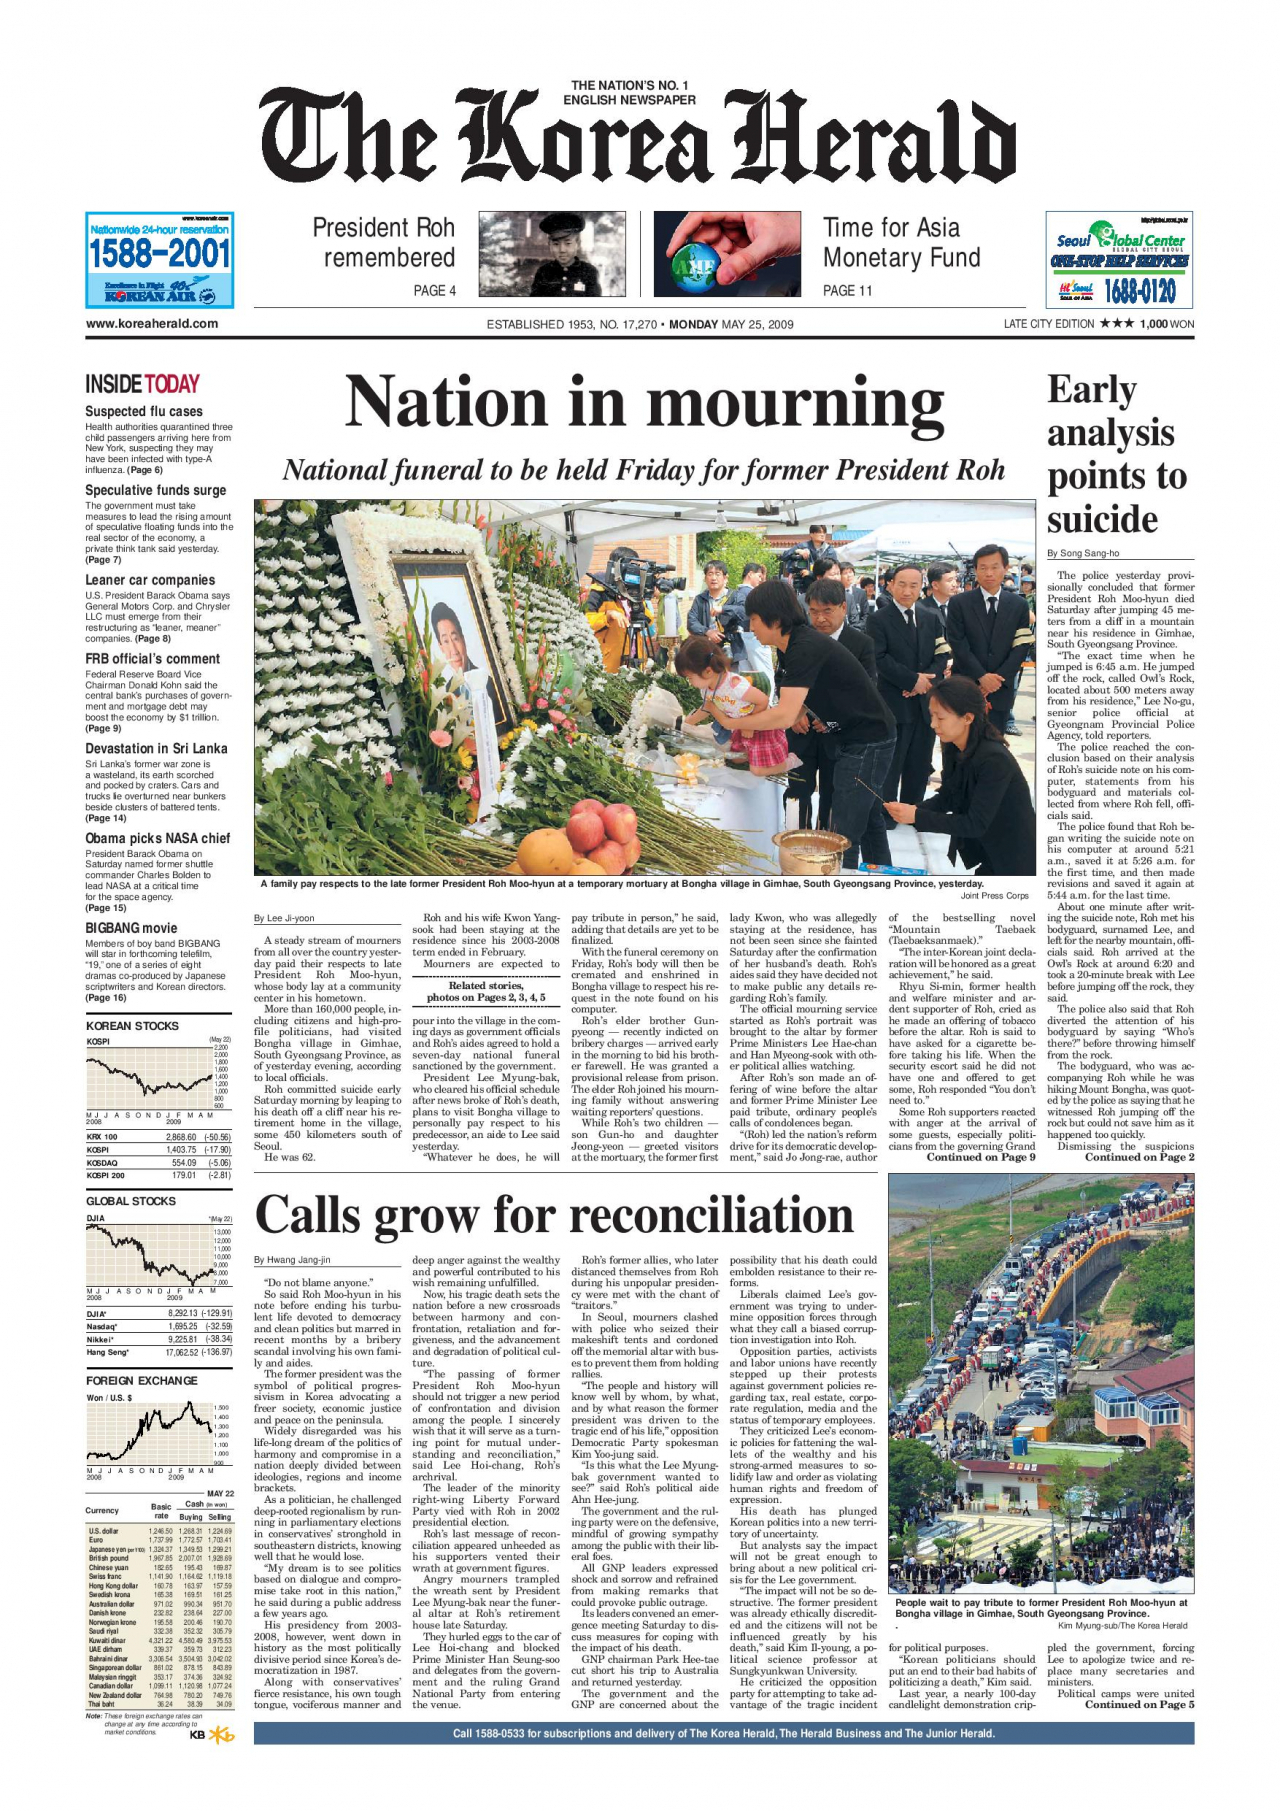 “Nation in mourning: National funeral to be held Friday for former President Roh,” reads the boldest headline on The Korea Herald’s front page for the May 25, 2009, edition, detailing how a steady stream of mourners exceeding 160,000 people visited Roh’s hometown to pay their respects. (The Korea Herald)